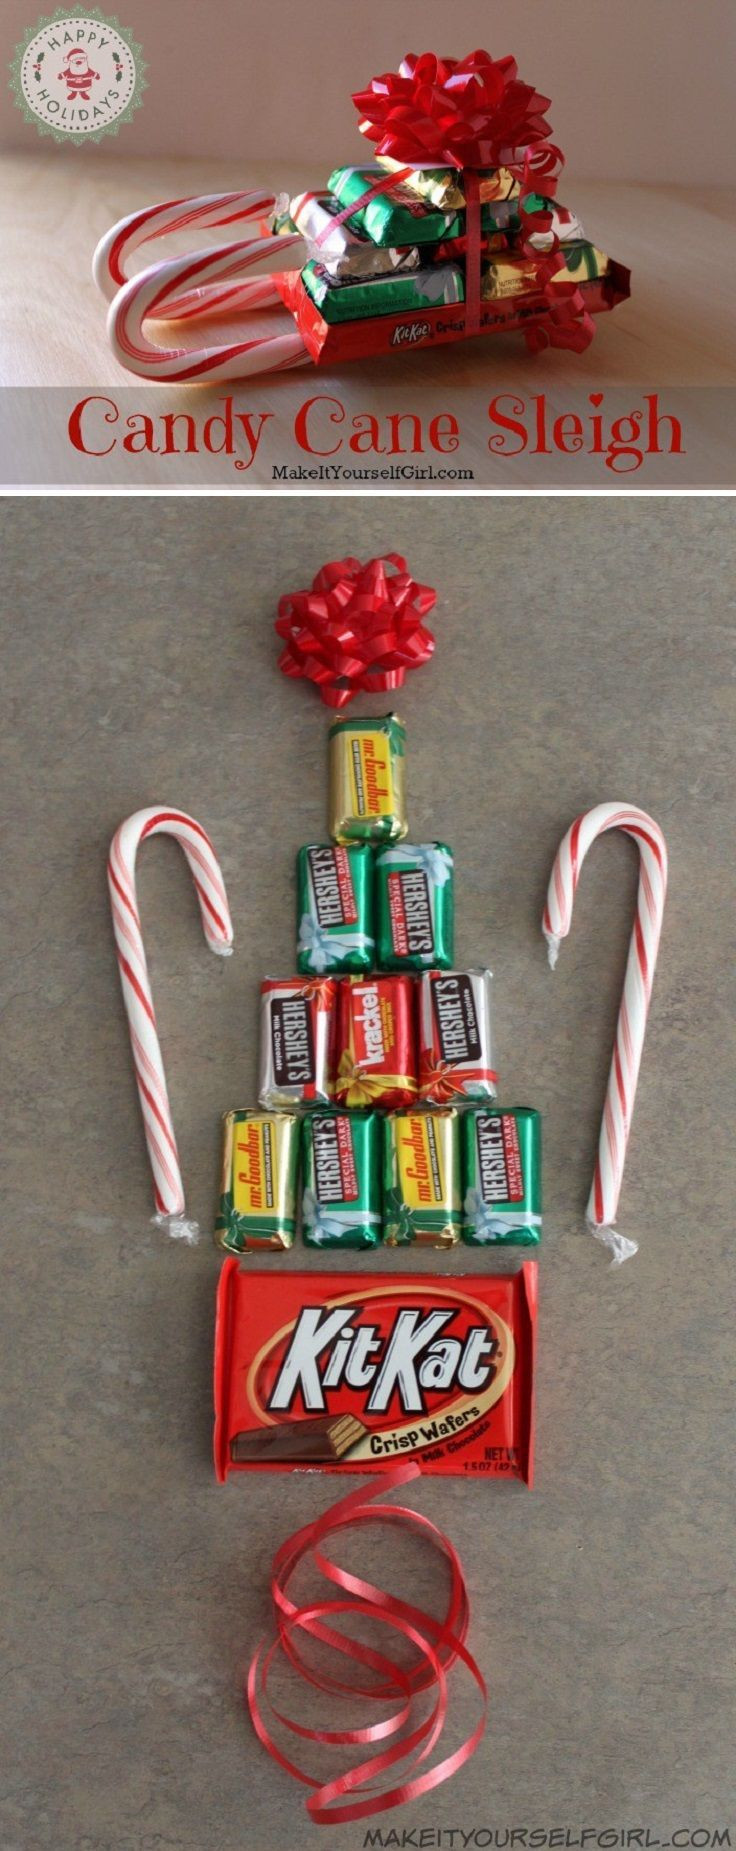 Pinterest Christmas Candy
 1000 ideas about Candy Christmas Decorations on Pinterest